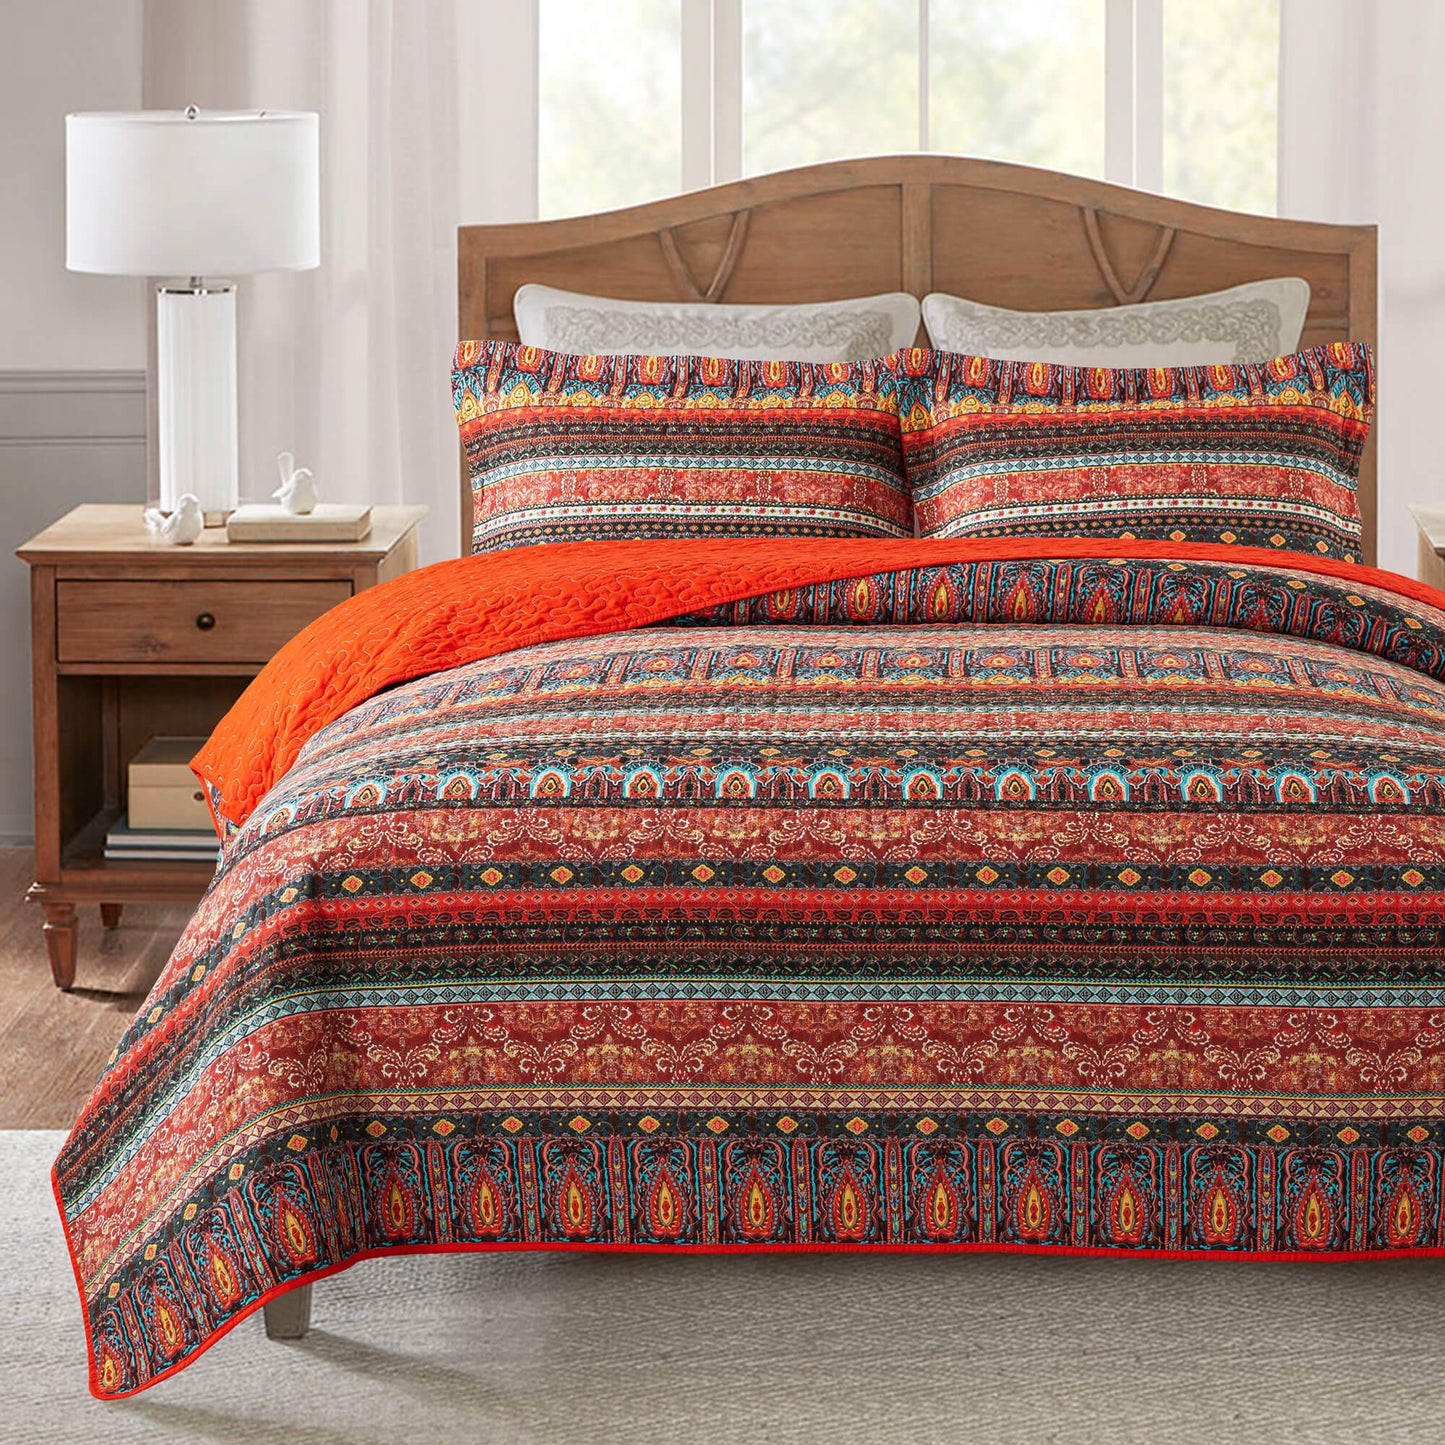 Cotton Bedspread Quilt Sets, Mysterious Bohemian Collections, Queen